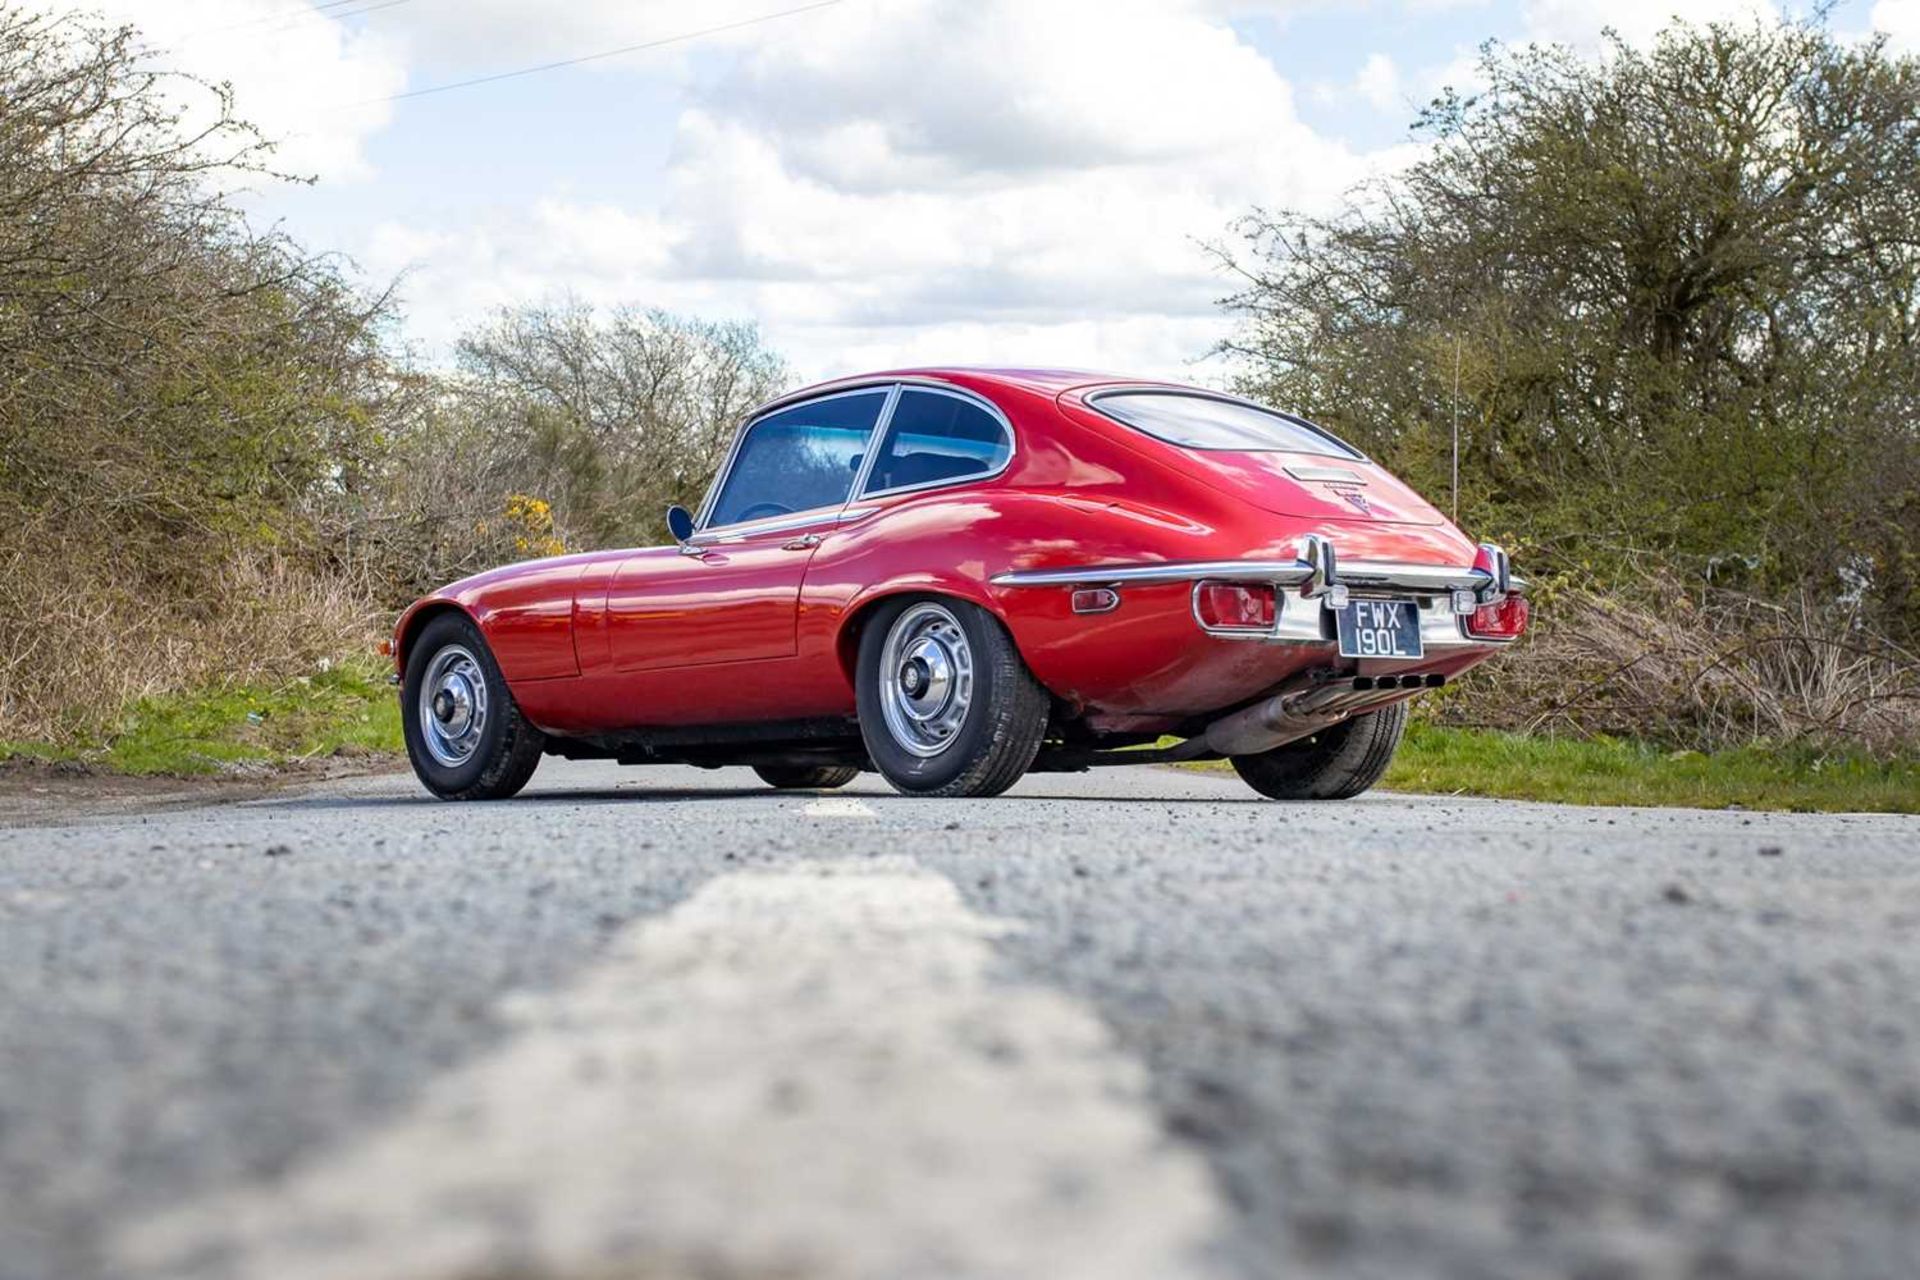 1973 Jaguar E-Type Coupe 5.3 V12 Three owners from new - Image 5 of 79